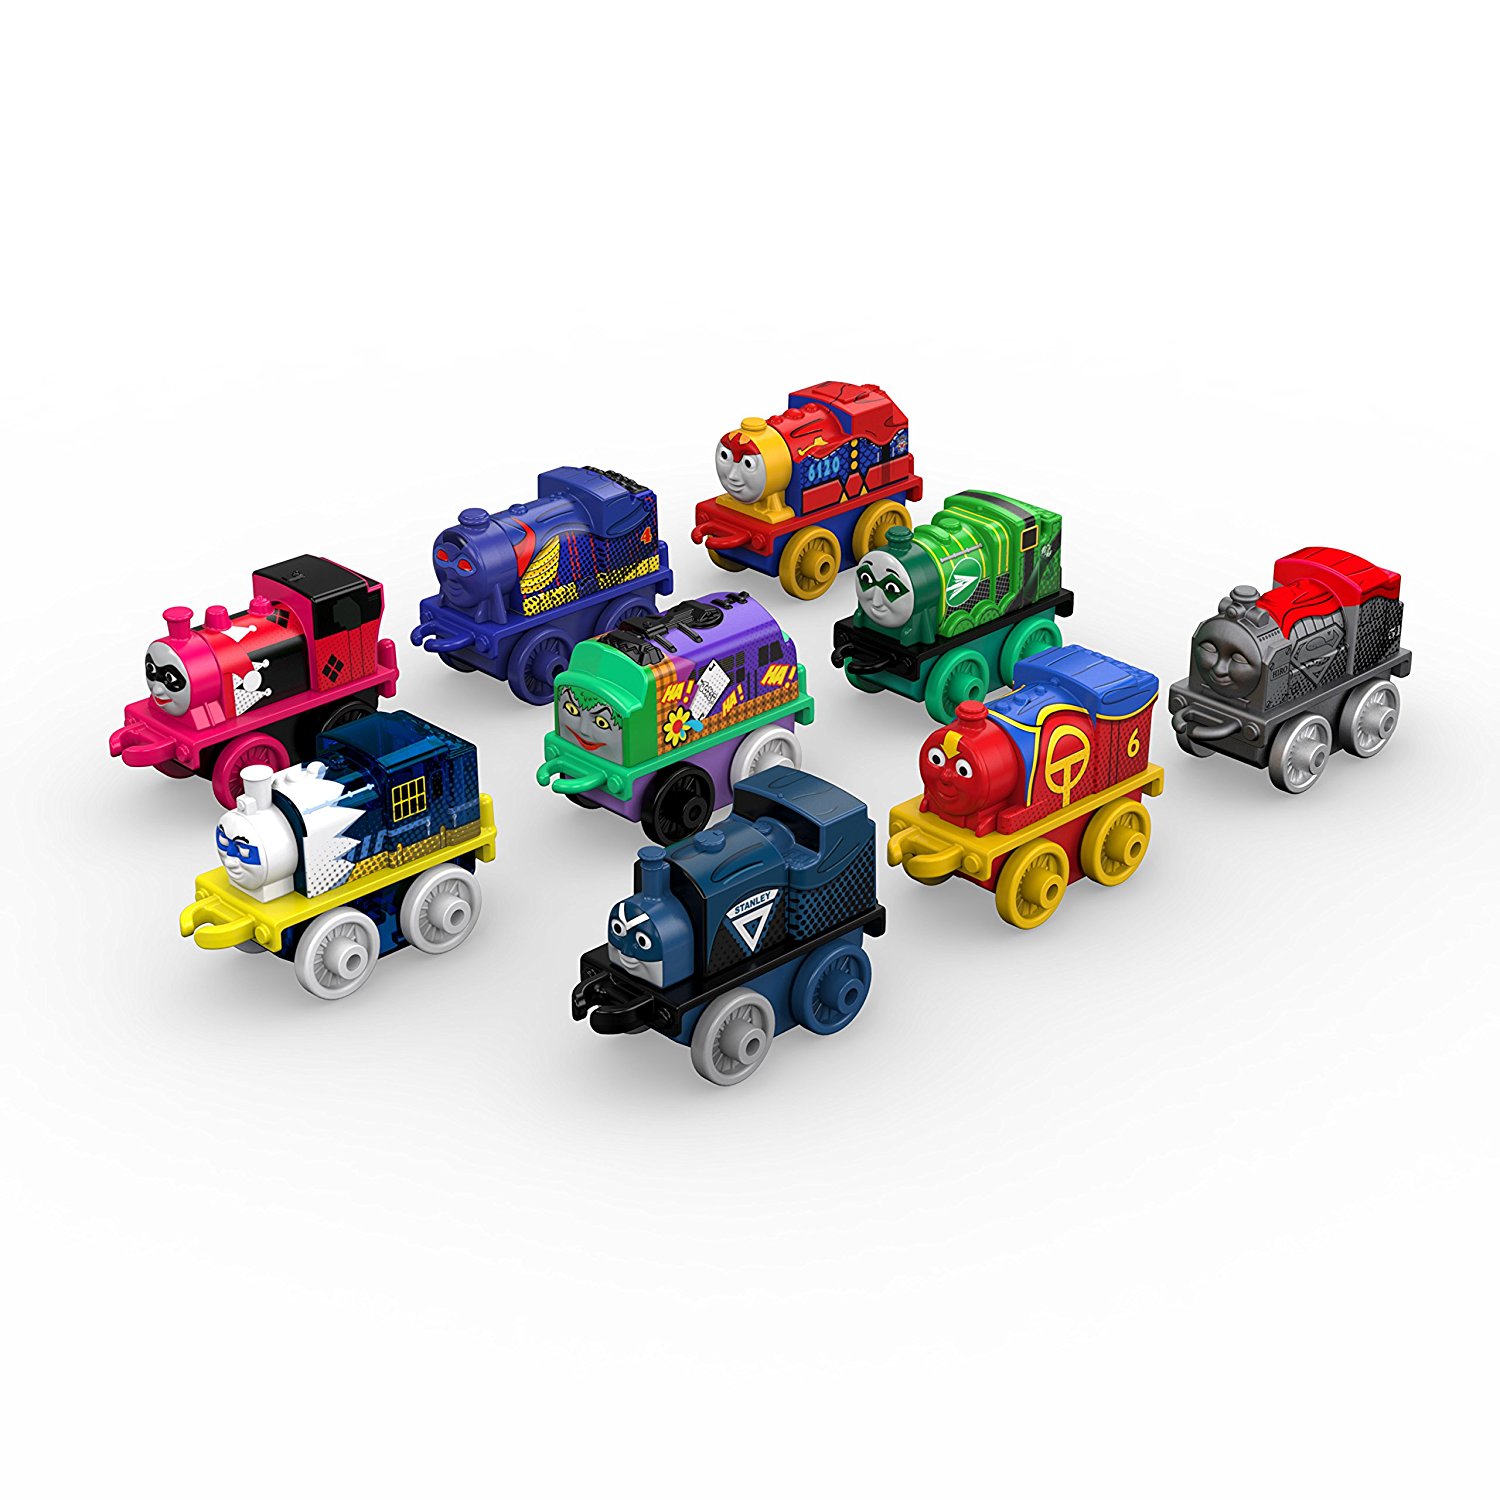 Dc Super Friends 9 Pack 1 2017 Thomas And Friends Minis Wiki